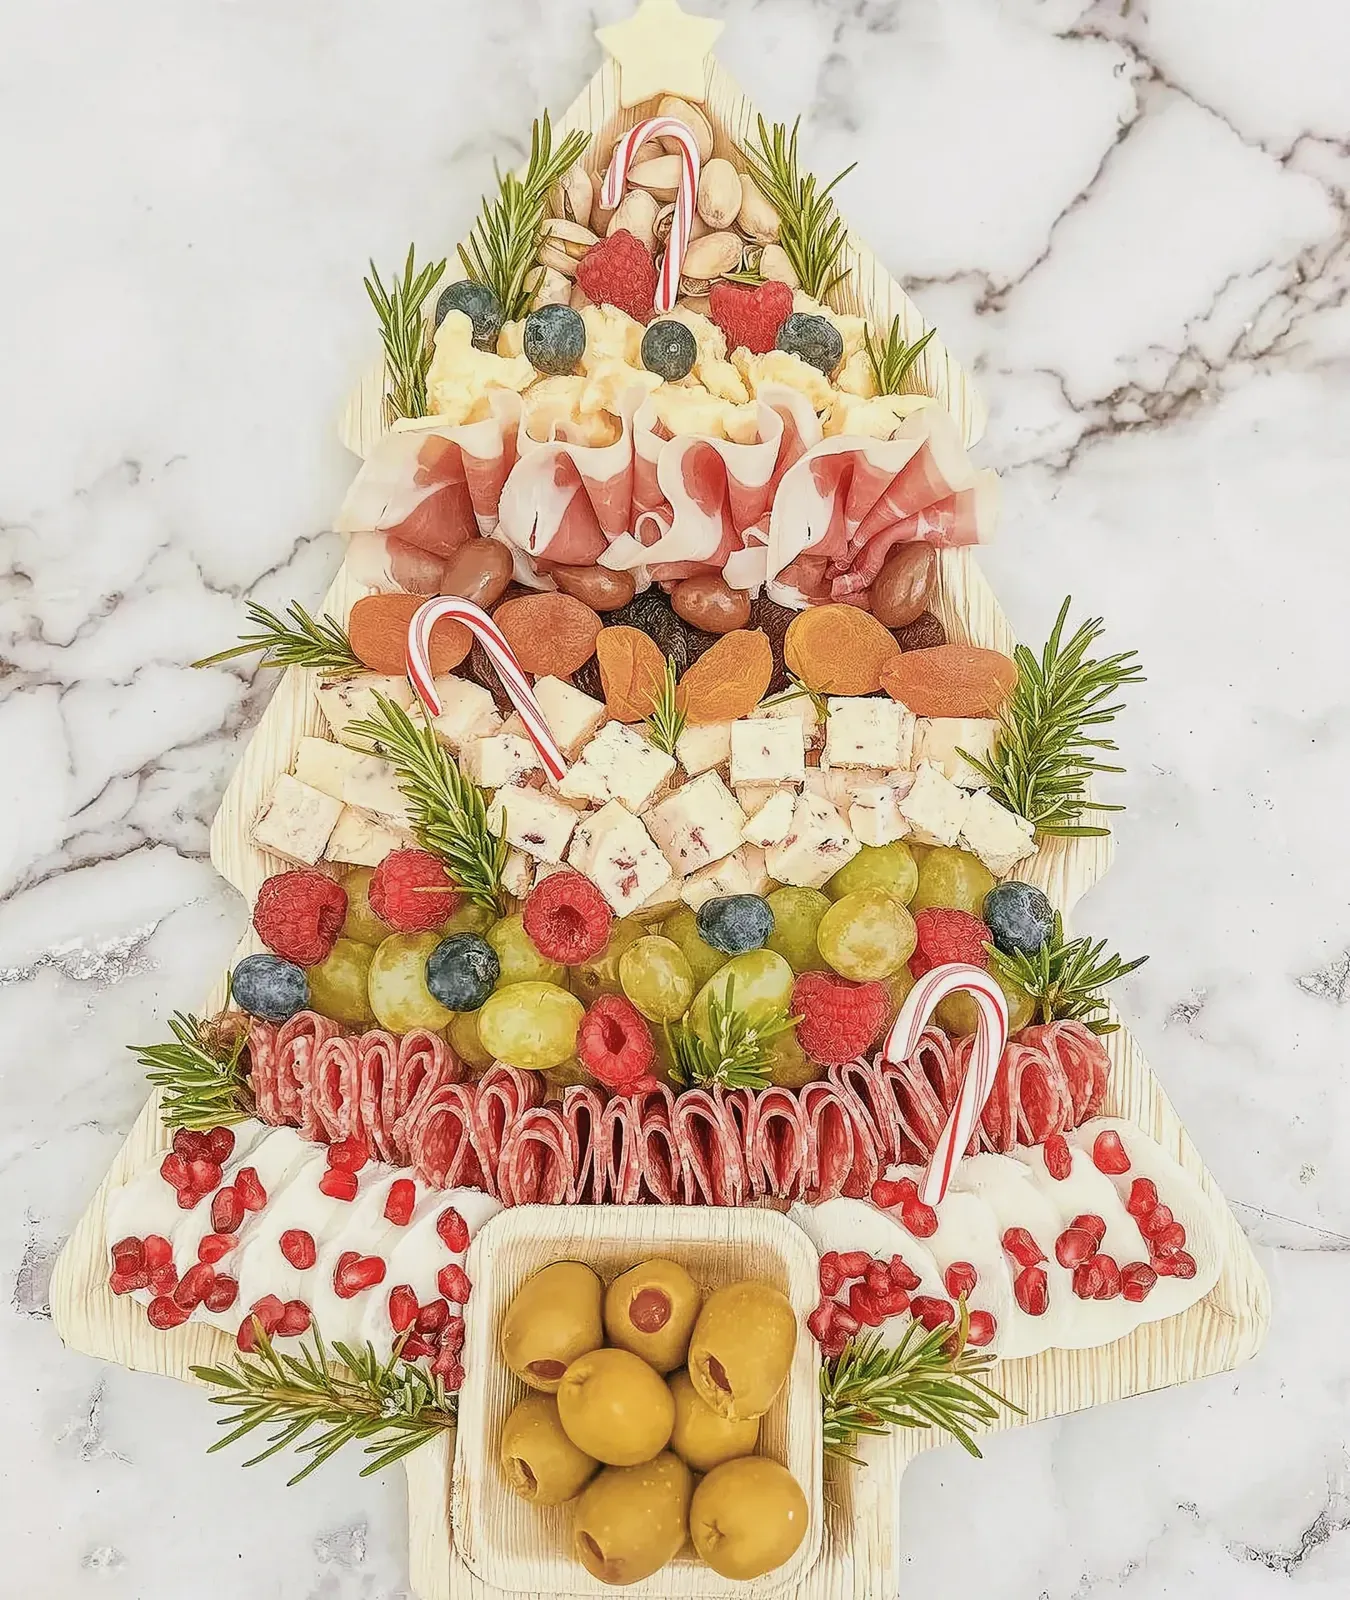 Festive Holiday Cheese Plate with Fruits and Olives